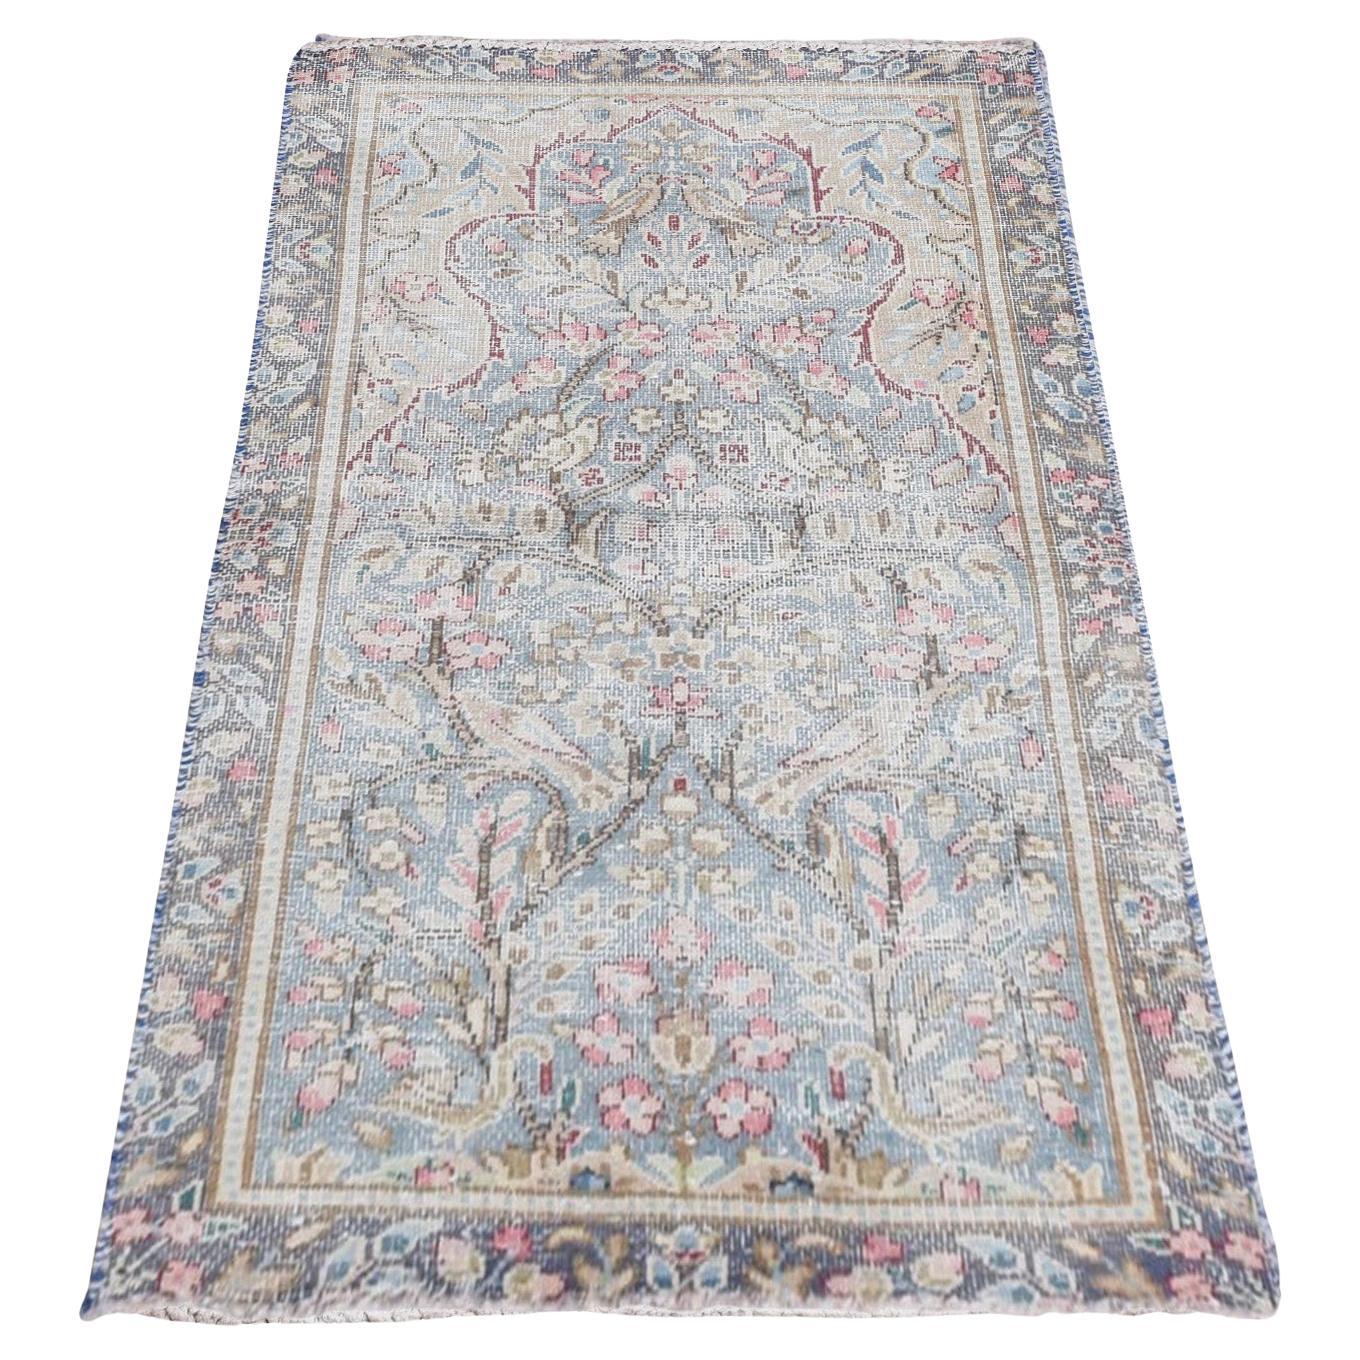 Blue Vintage Persian Kerman Leaf and Bird Design Hand Knotted Wool Rug 1'9"x3'7" For Sale